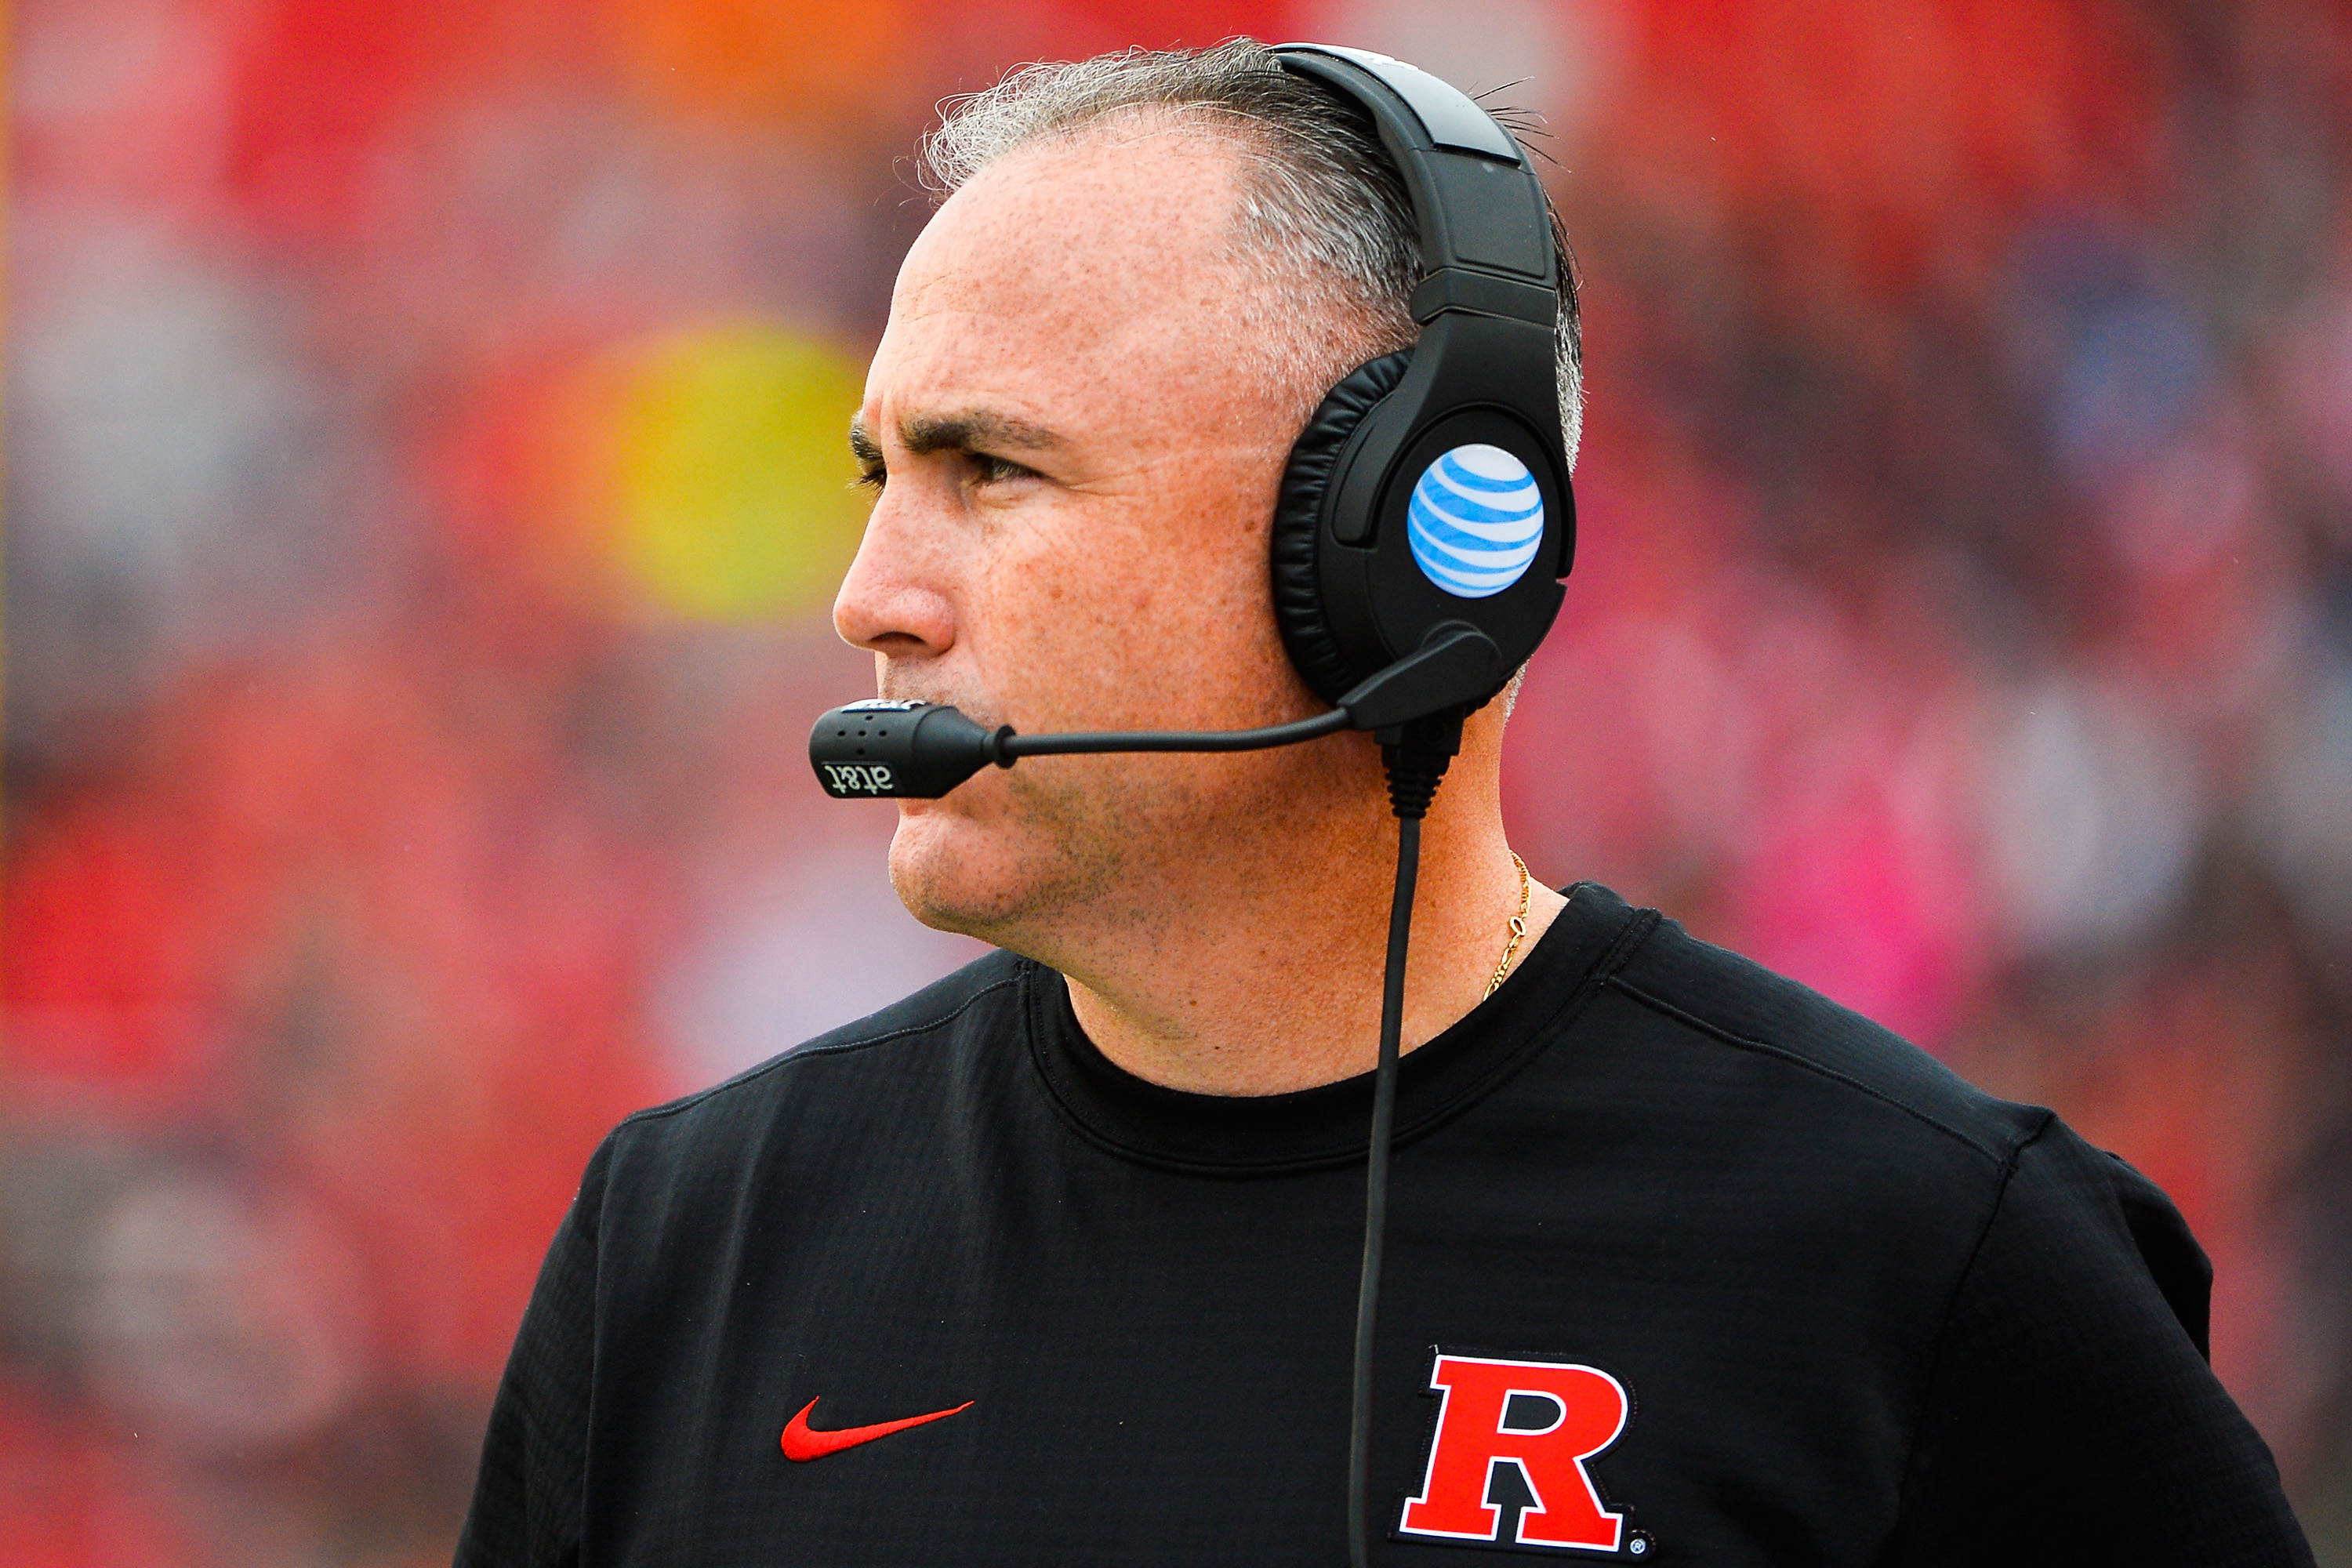 Head coach Kyle Flood of the Rutgers Scarlet Knights looks on during a game against the Maryland Terrapins at High Point Solutions Stadium on November 28, 2015 in Piscataway, New Jersey.